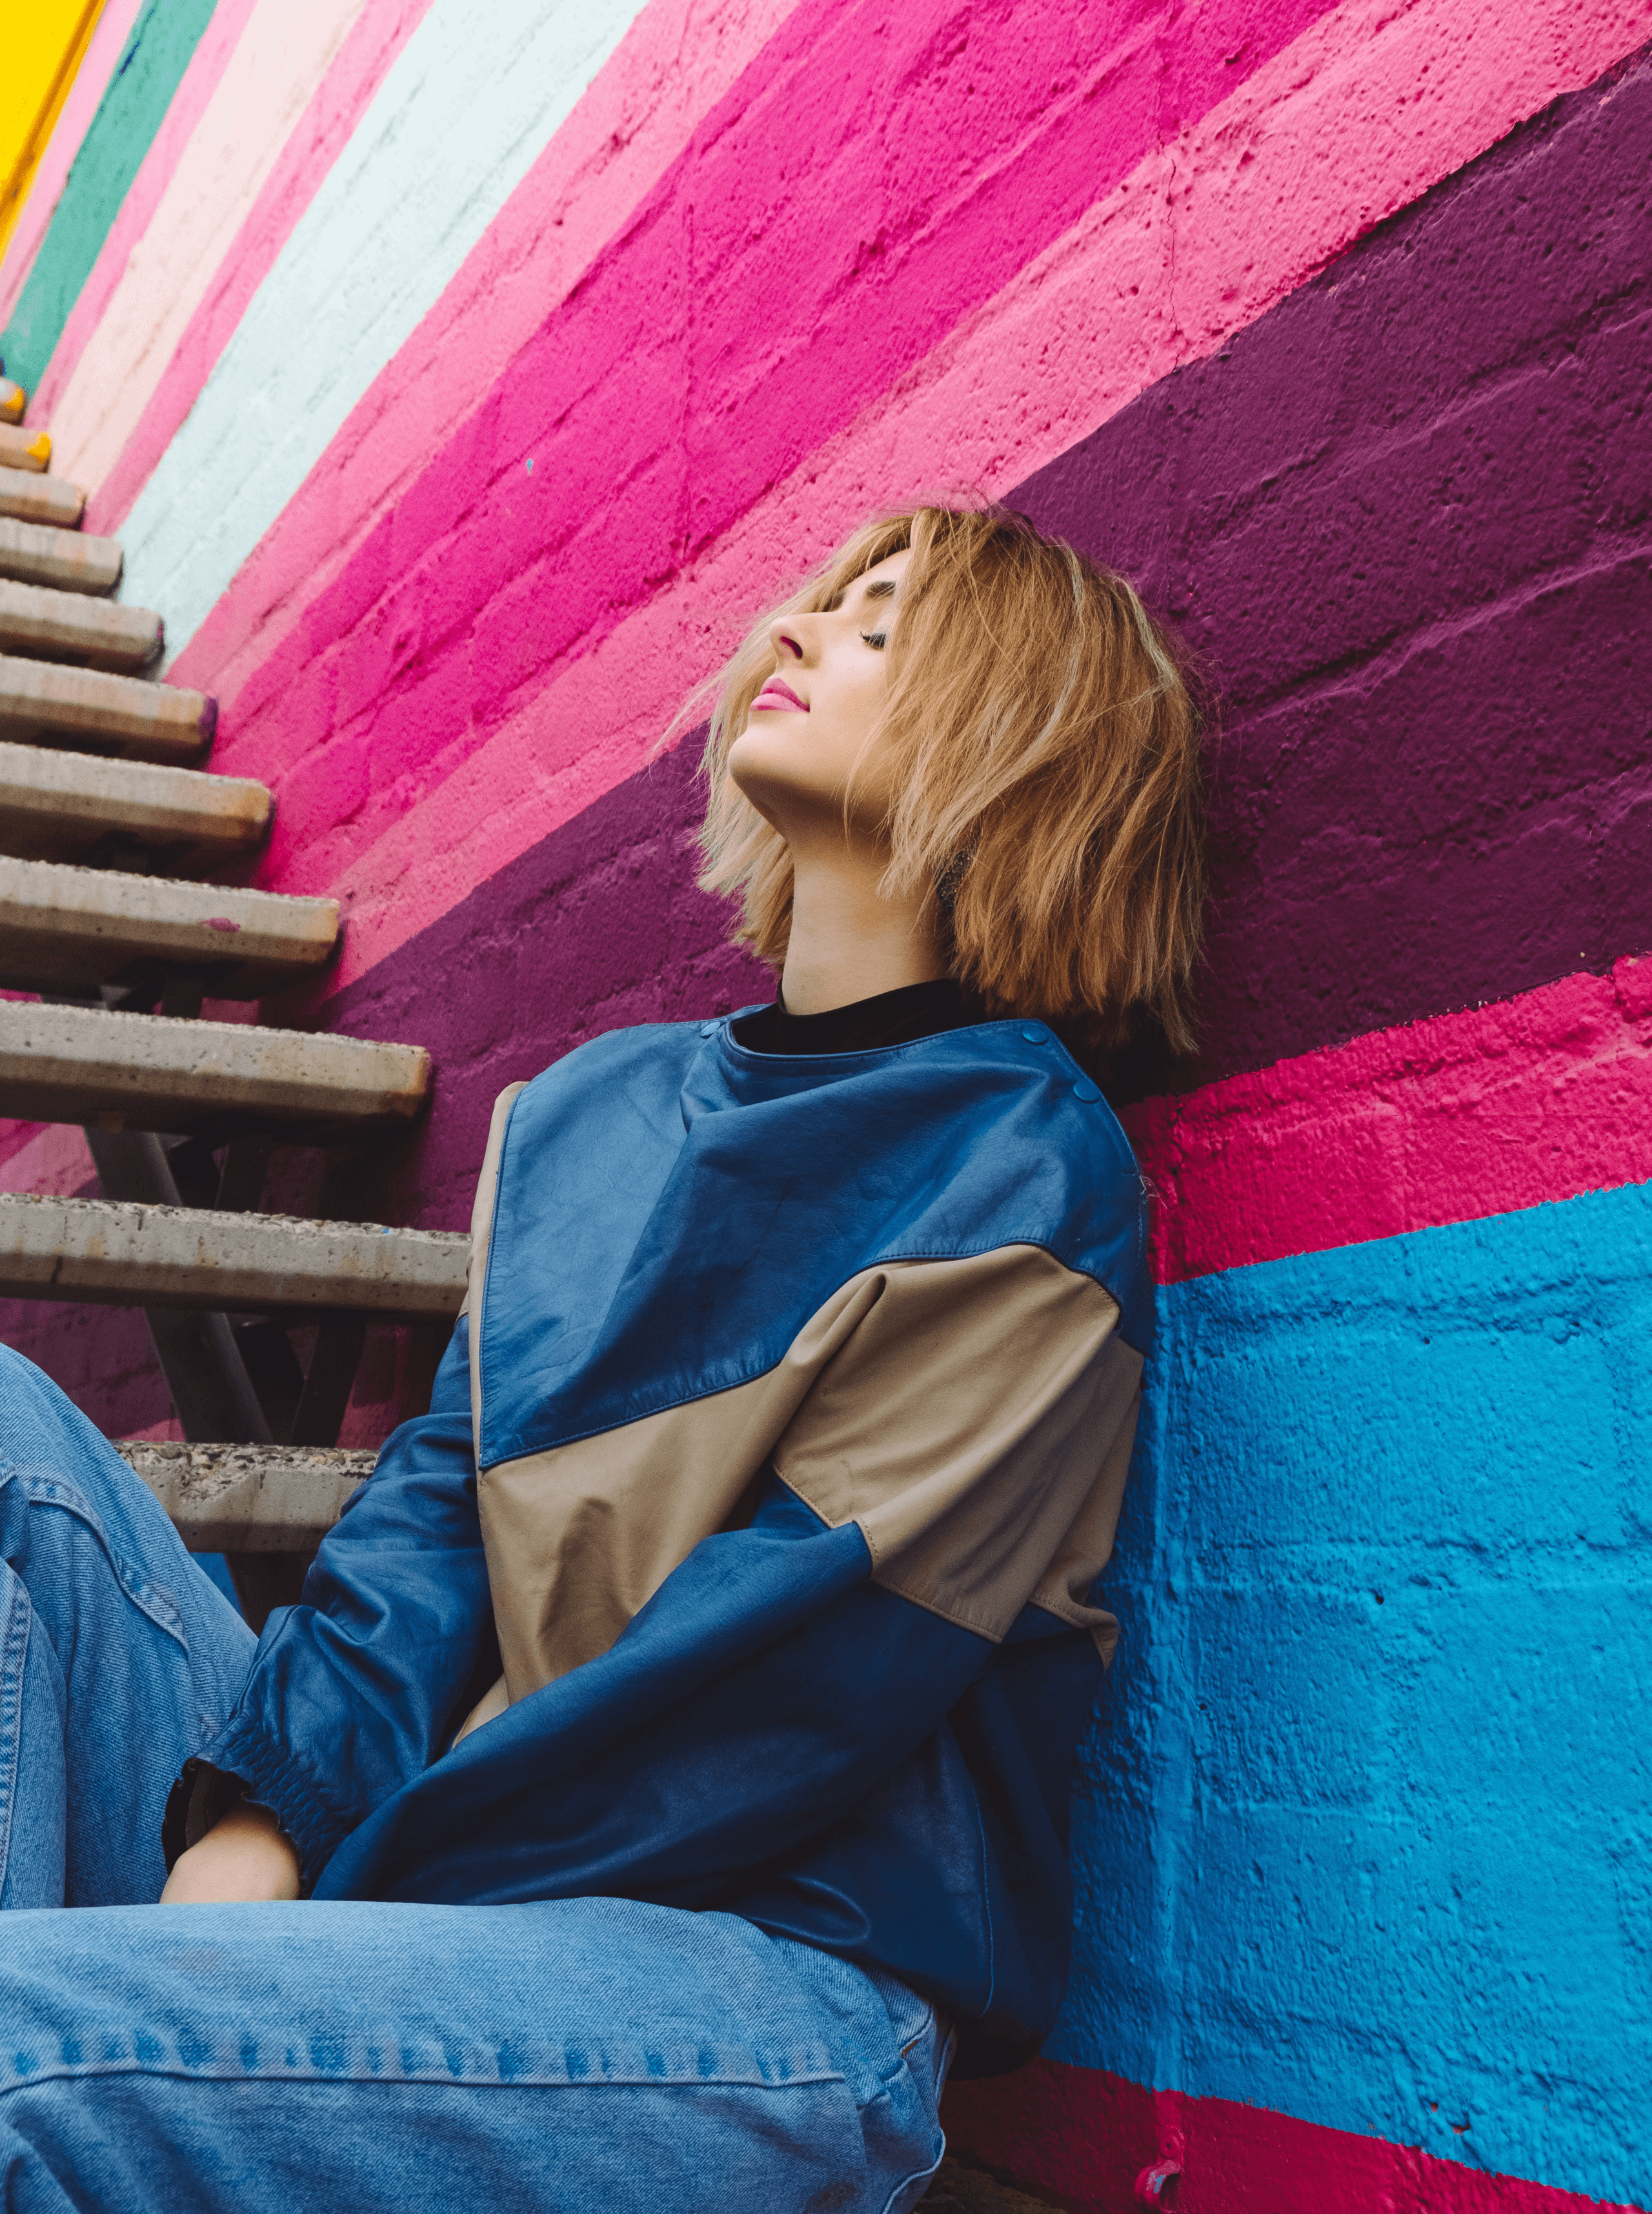 Woman Leaning on Colorful Wall Below The Stairs